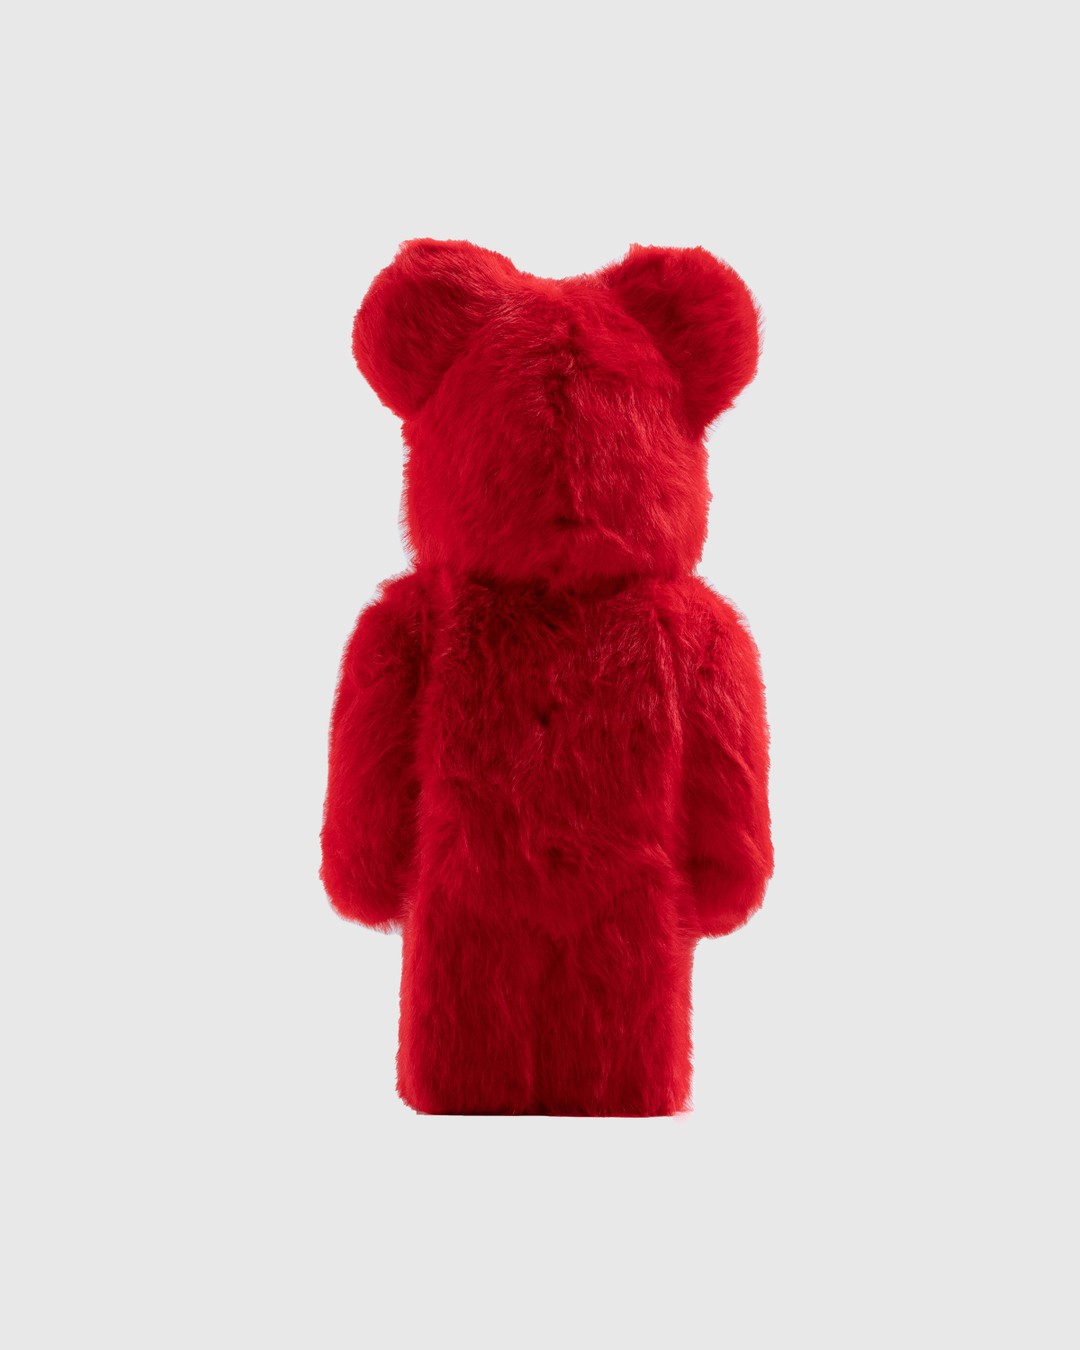 Medicom – Be@rbrick Elmo Costume Version 2 400% Red - Arts & Collectibles - Red - Image 3